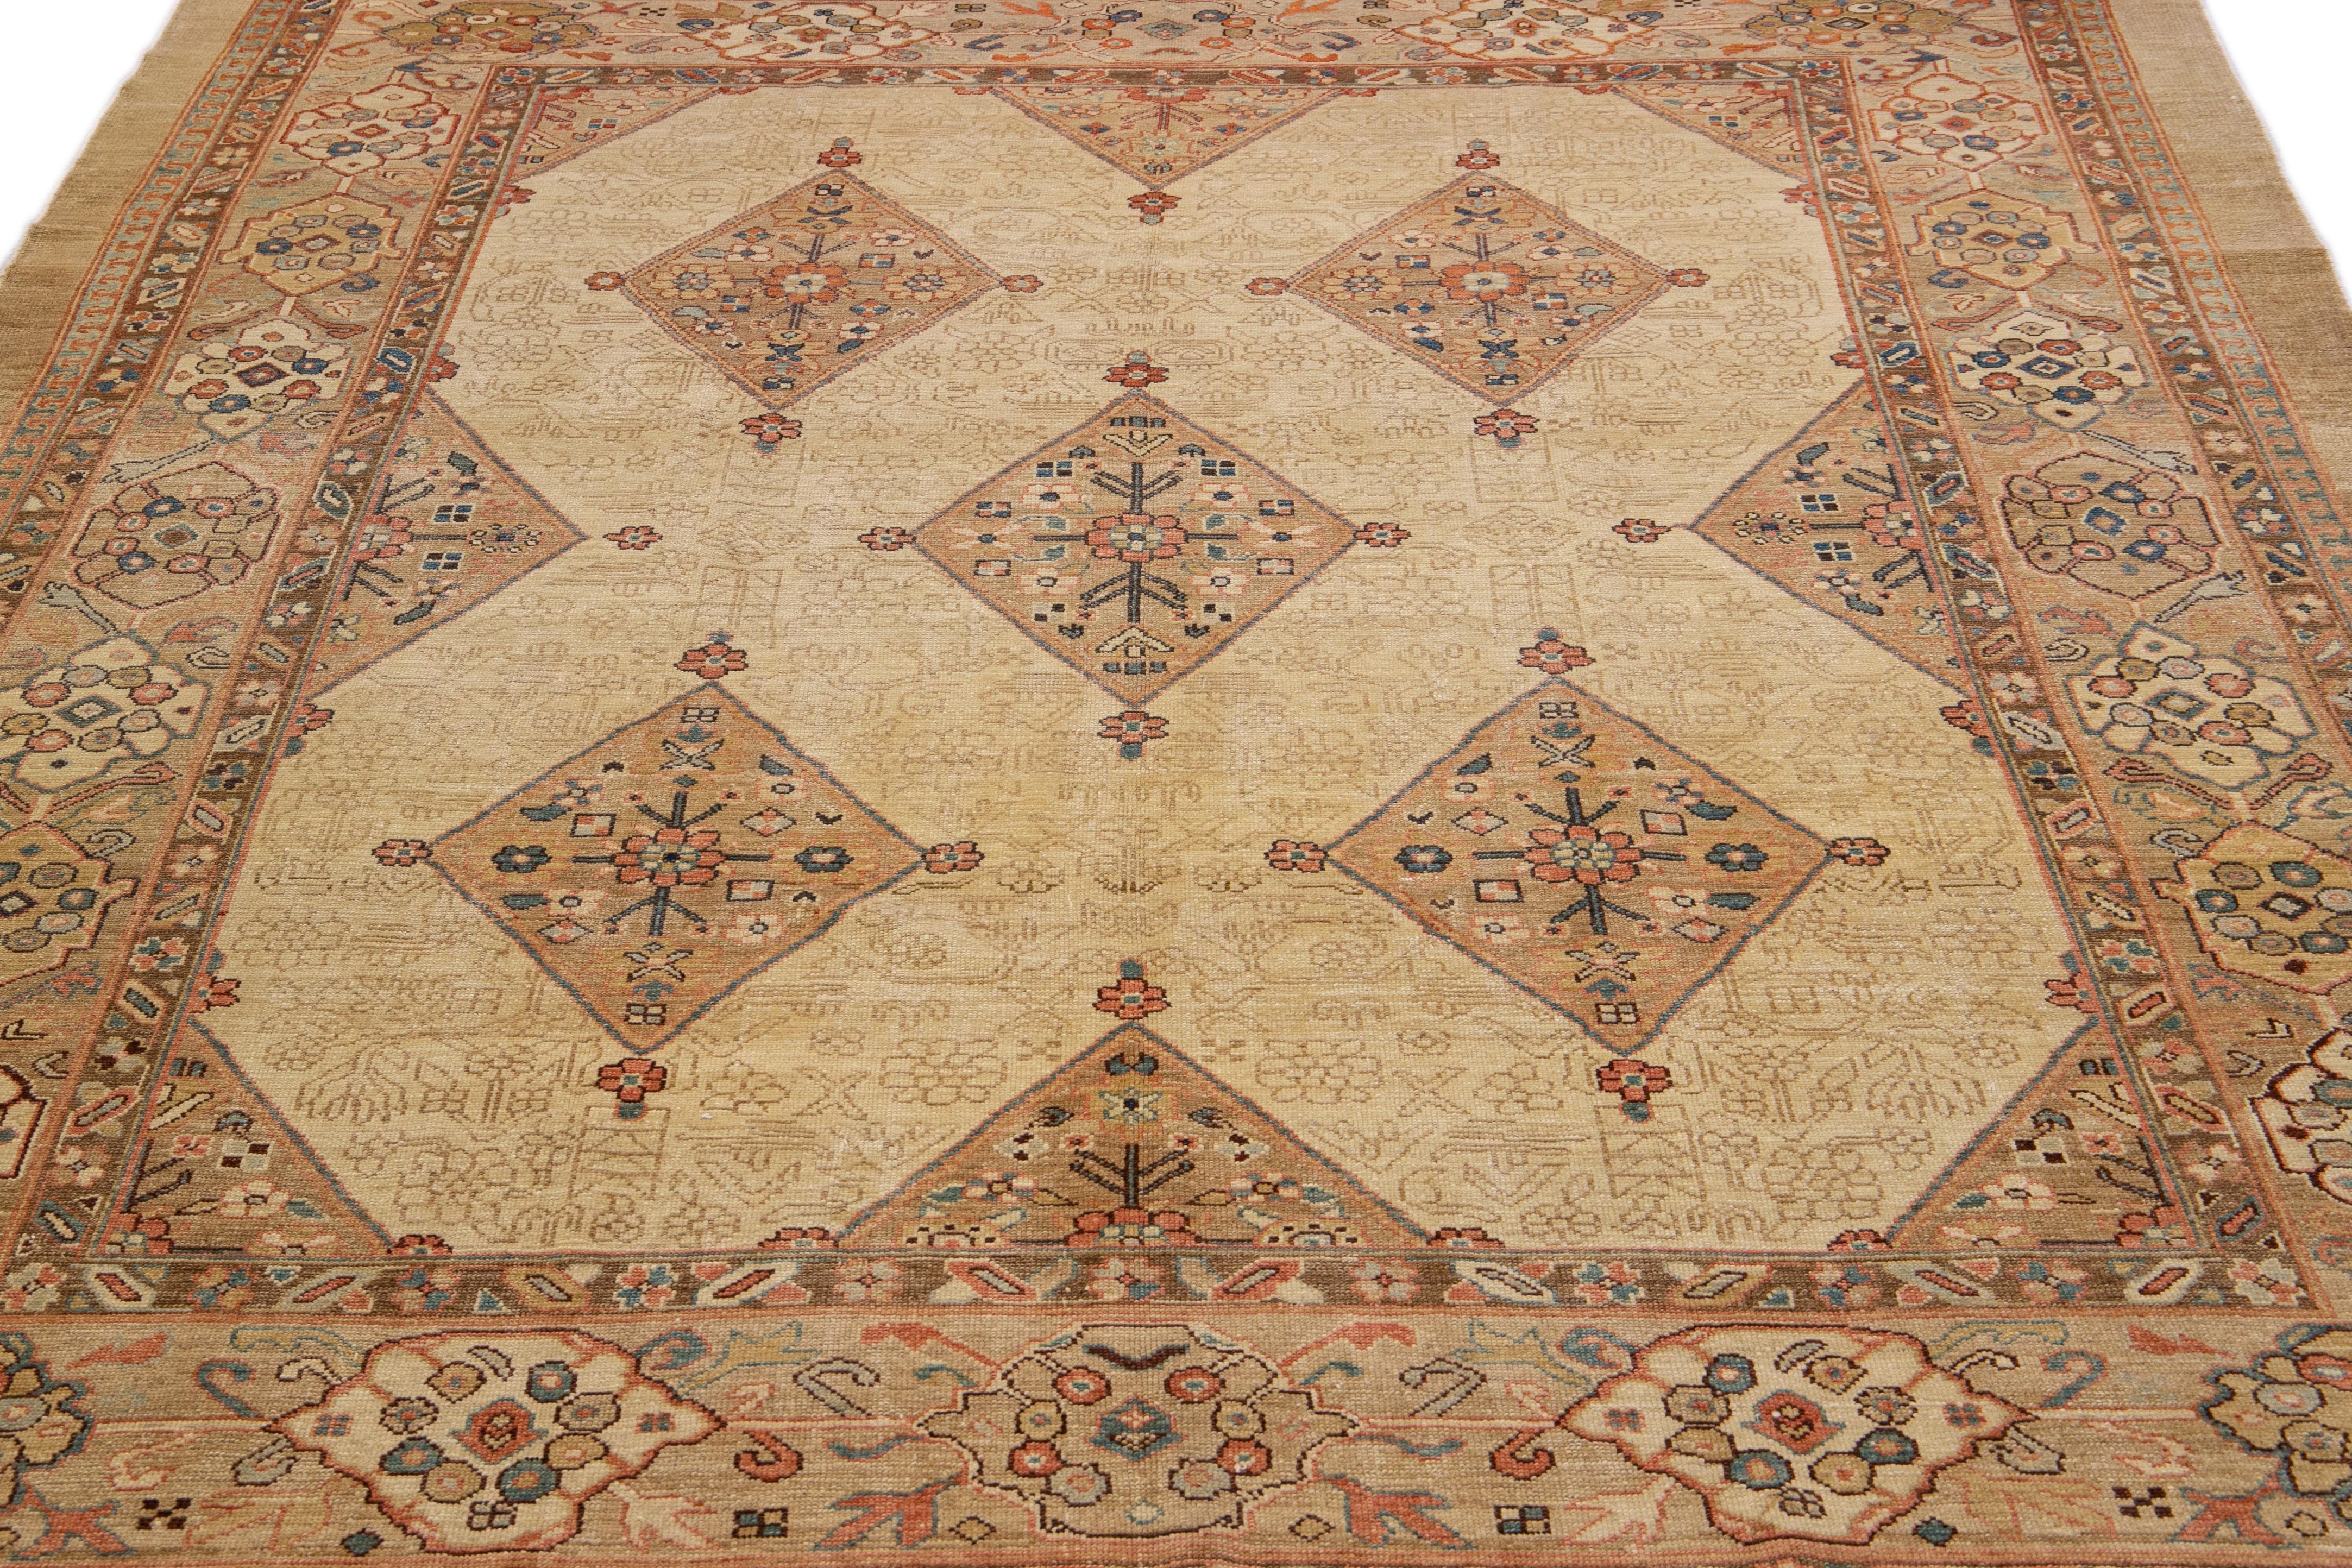 Beautiful modern Persian Serab hand-knotted wool rug with a beige field. This modern rug has gray and tan accents in a gorgeous all-over Classic vine scroll and a palmettes motif.

This rug measures: 8'9